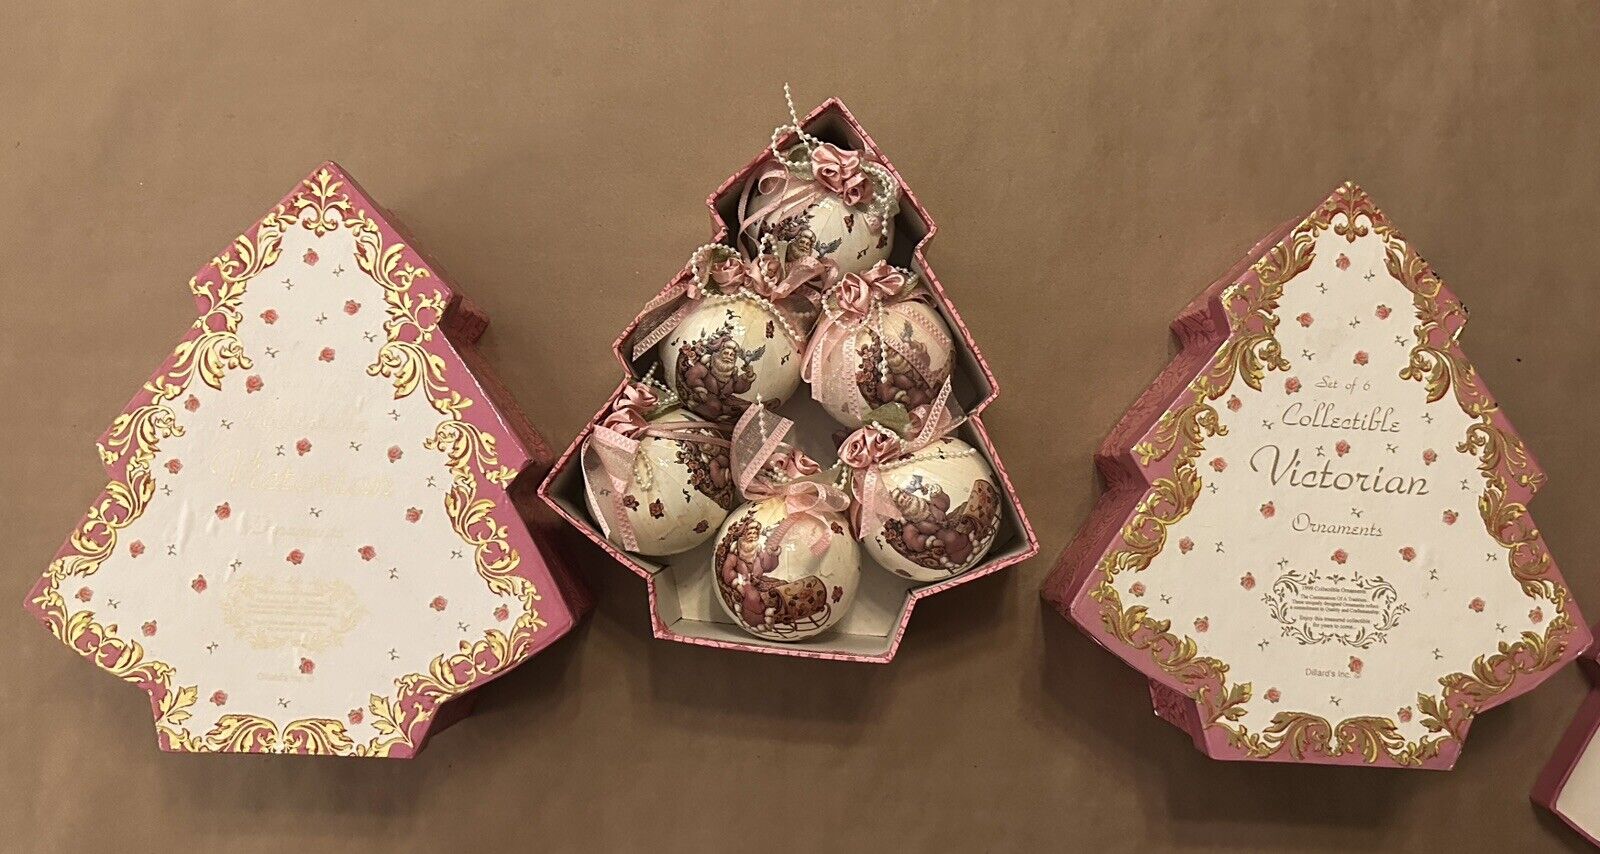 3 -Vintage Dillards Pink Collectible Victorian Ornaments Set of 6 Christmas 1999